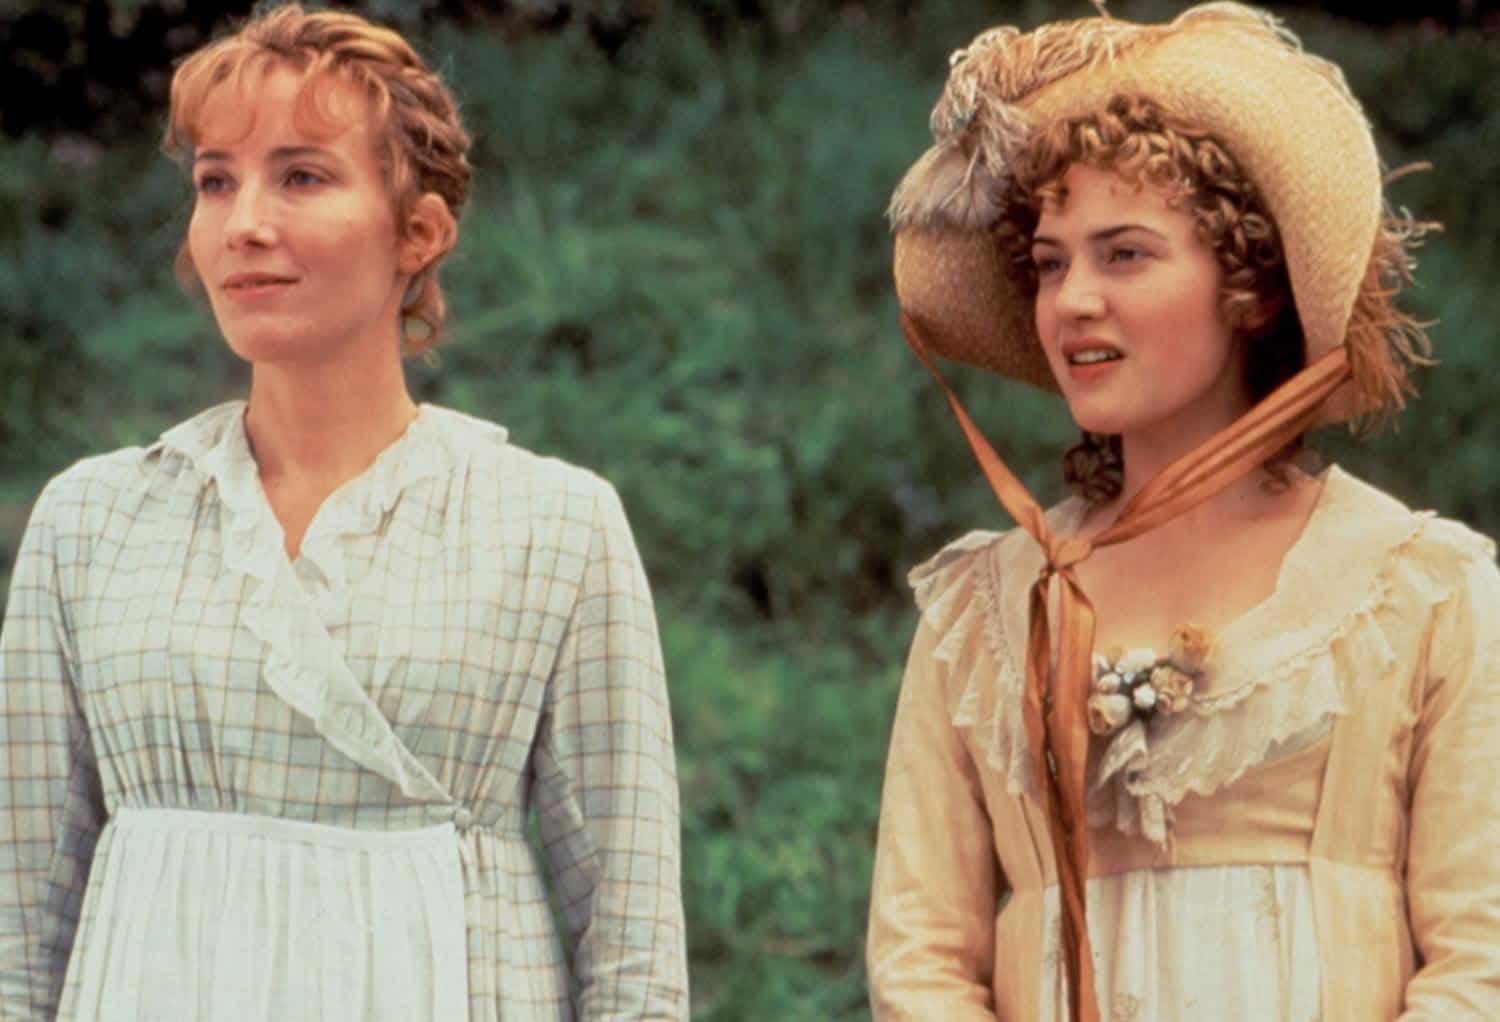 Emma Thompson and Kate Winslet in the movie 'Sense and Sensibility'